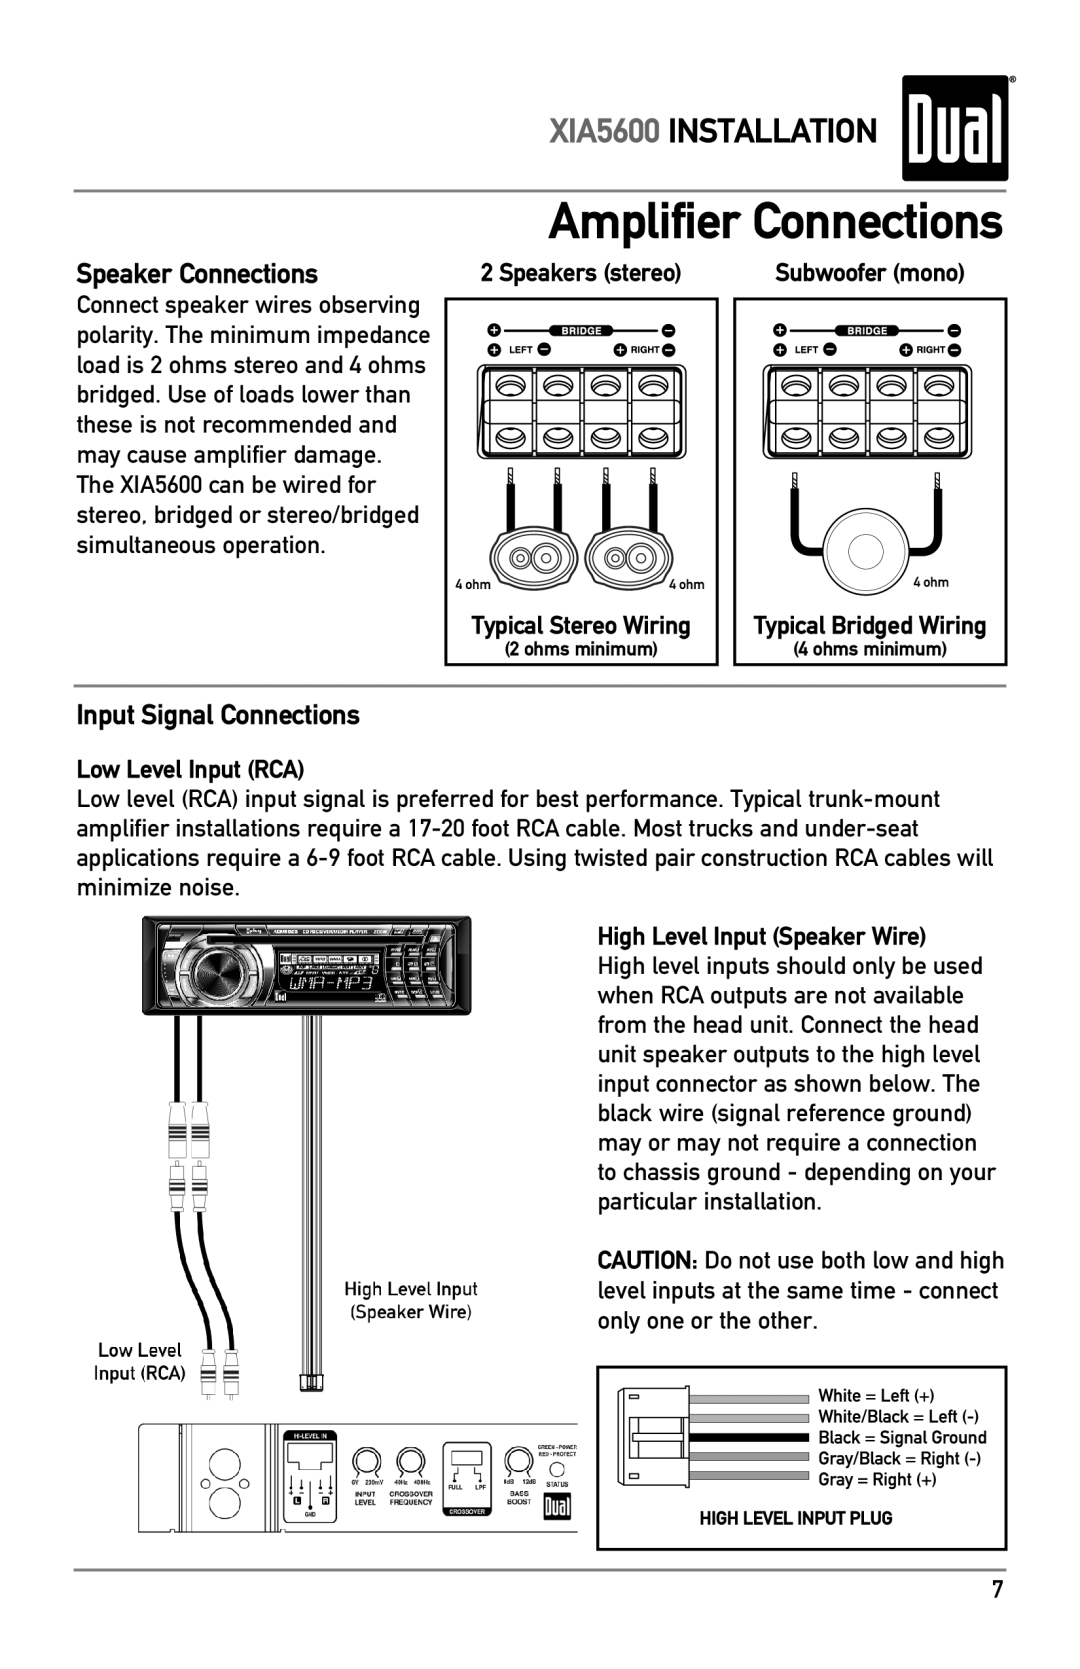 Dual owner manual Amplifier Connections, Speaker Connections, Input Signal Connections, XIA5600 INSTALLATION 